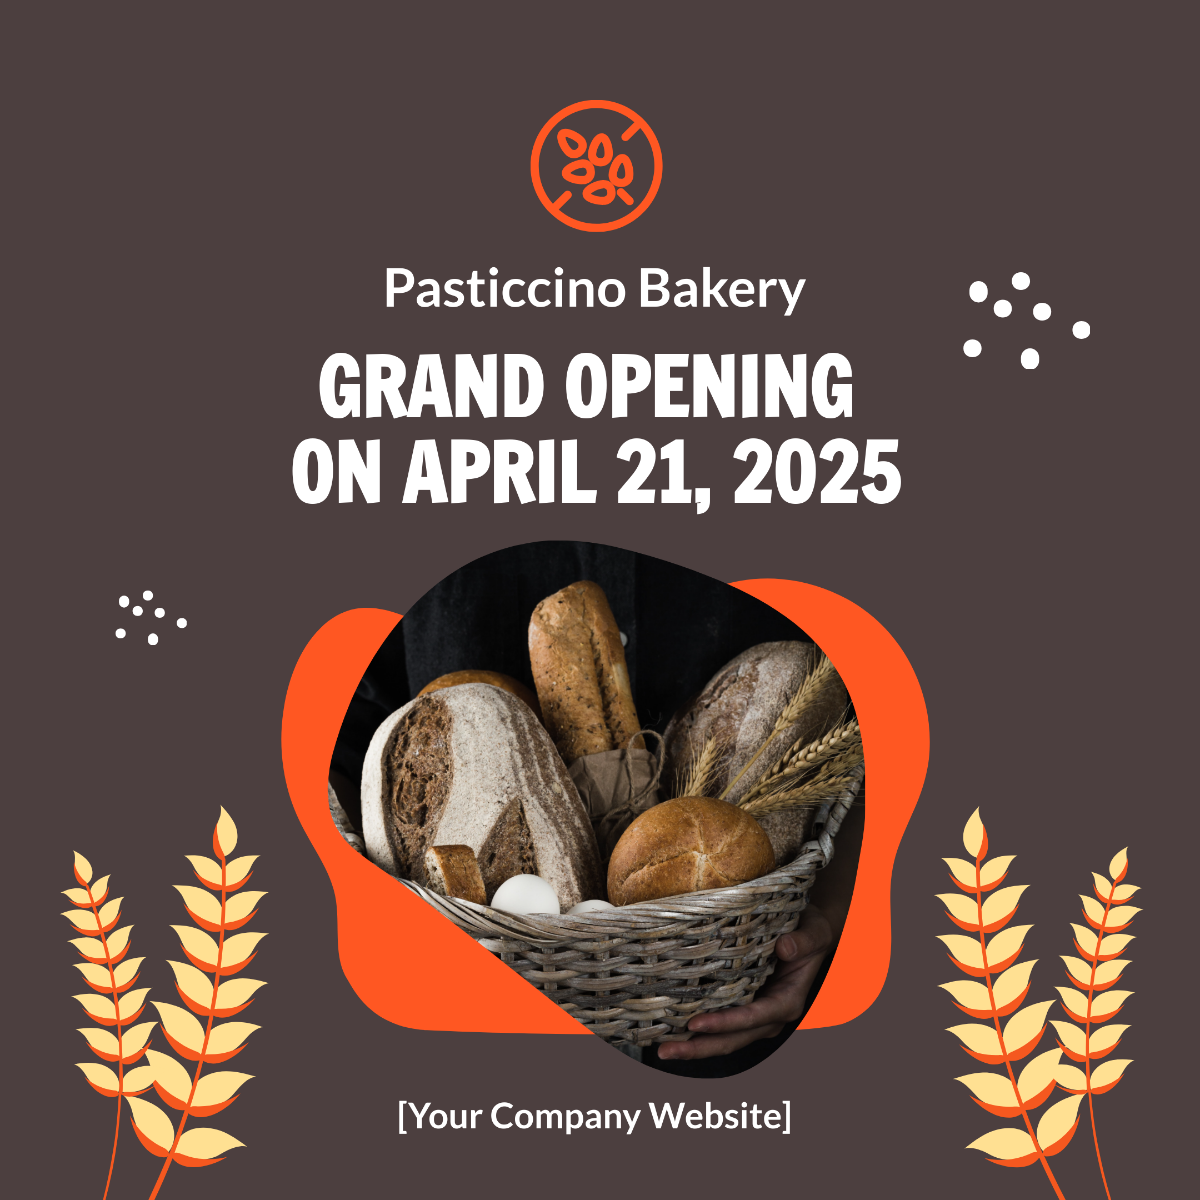 Free Bakery Grand Opening Instagram Post Template